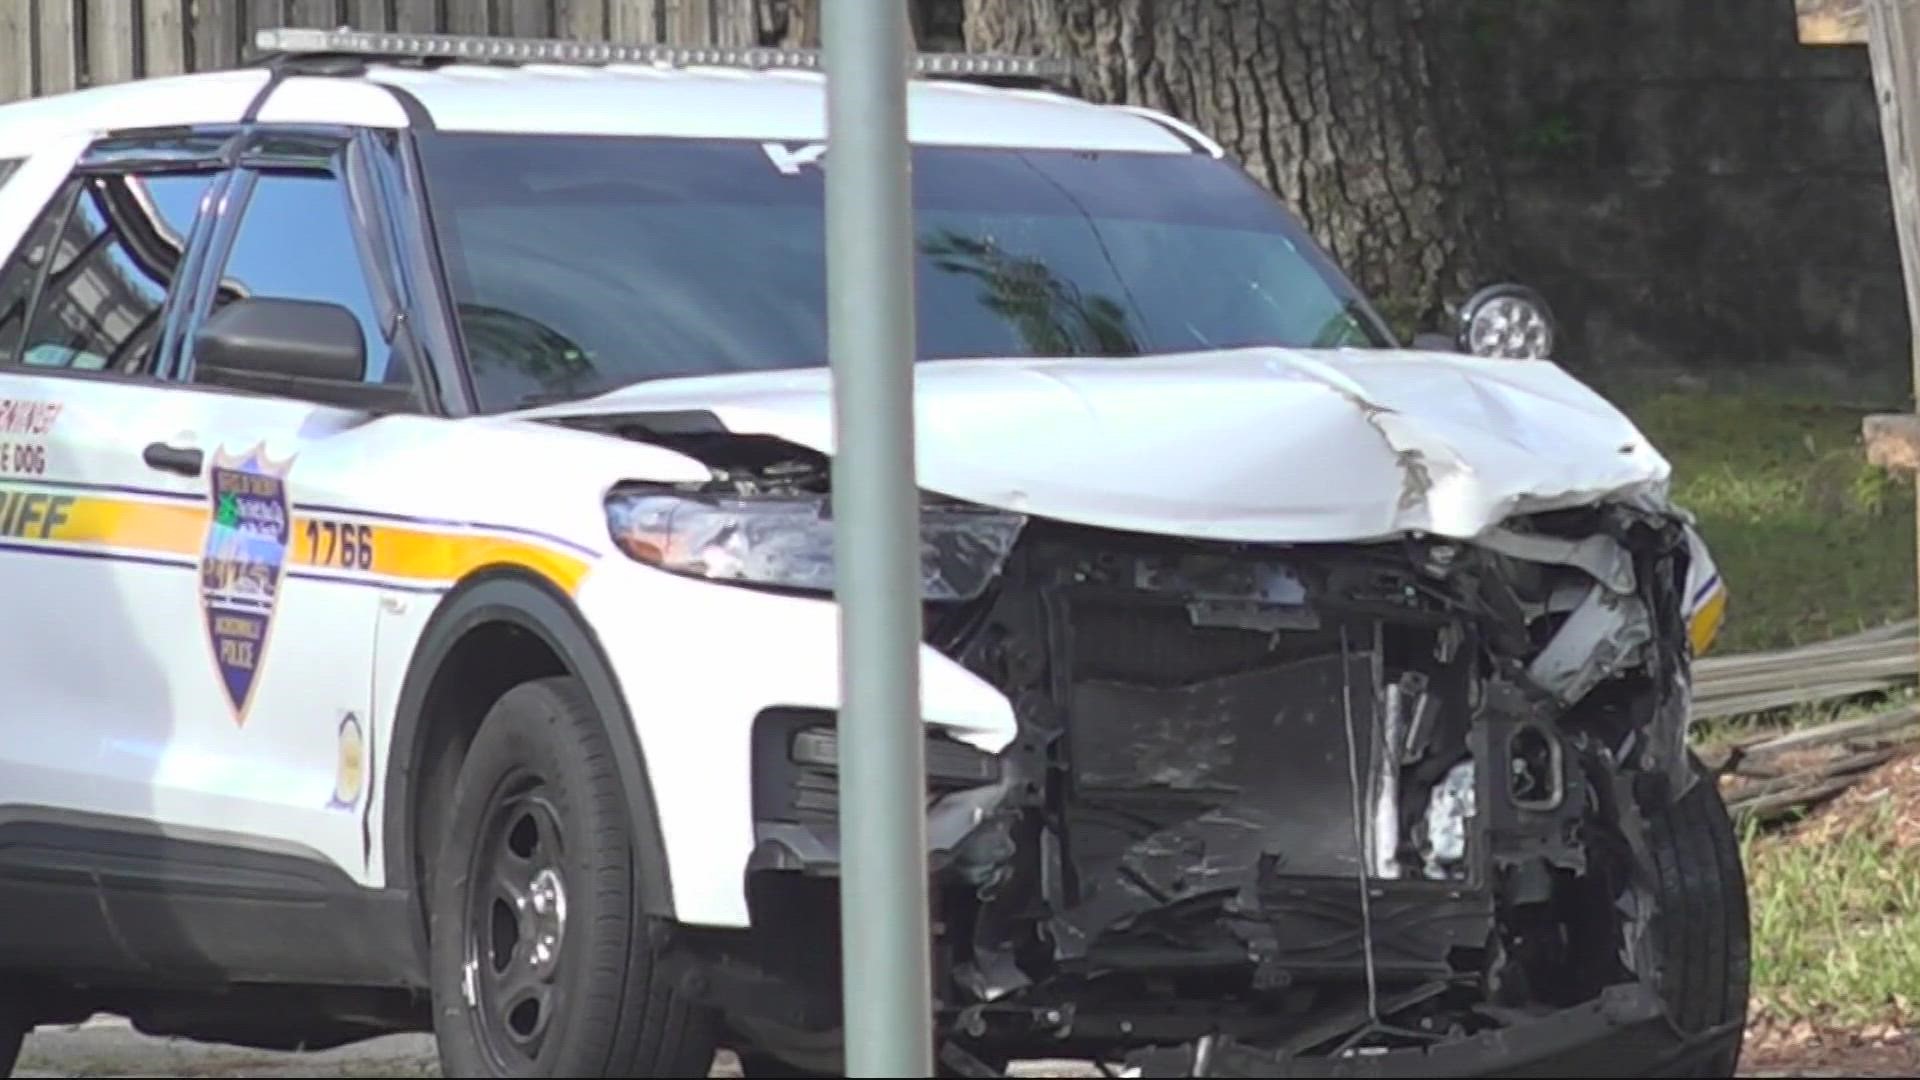 During the course of a pursuit, police say two JSO marked patrol vehicles ran into each other.